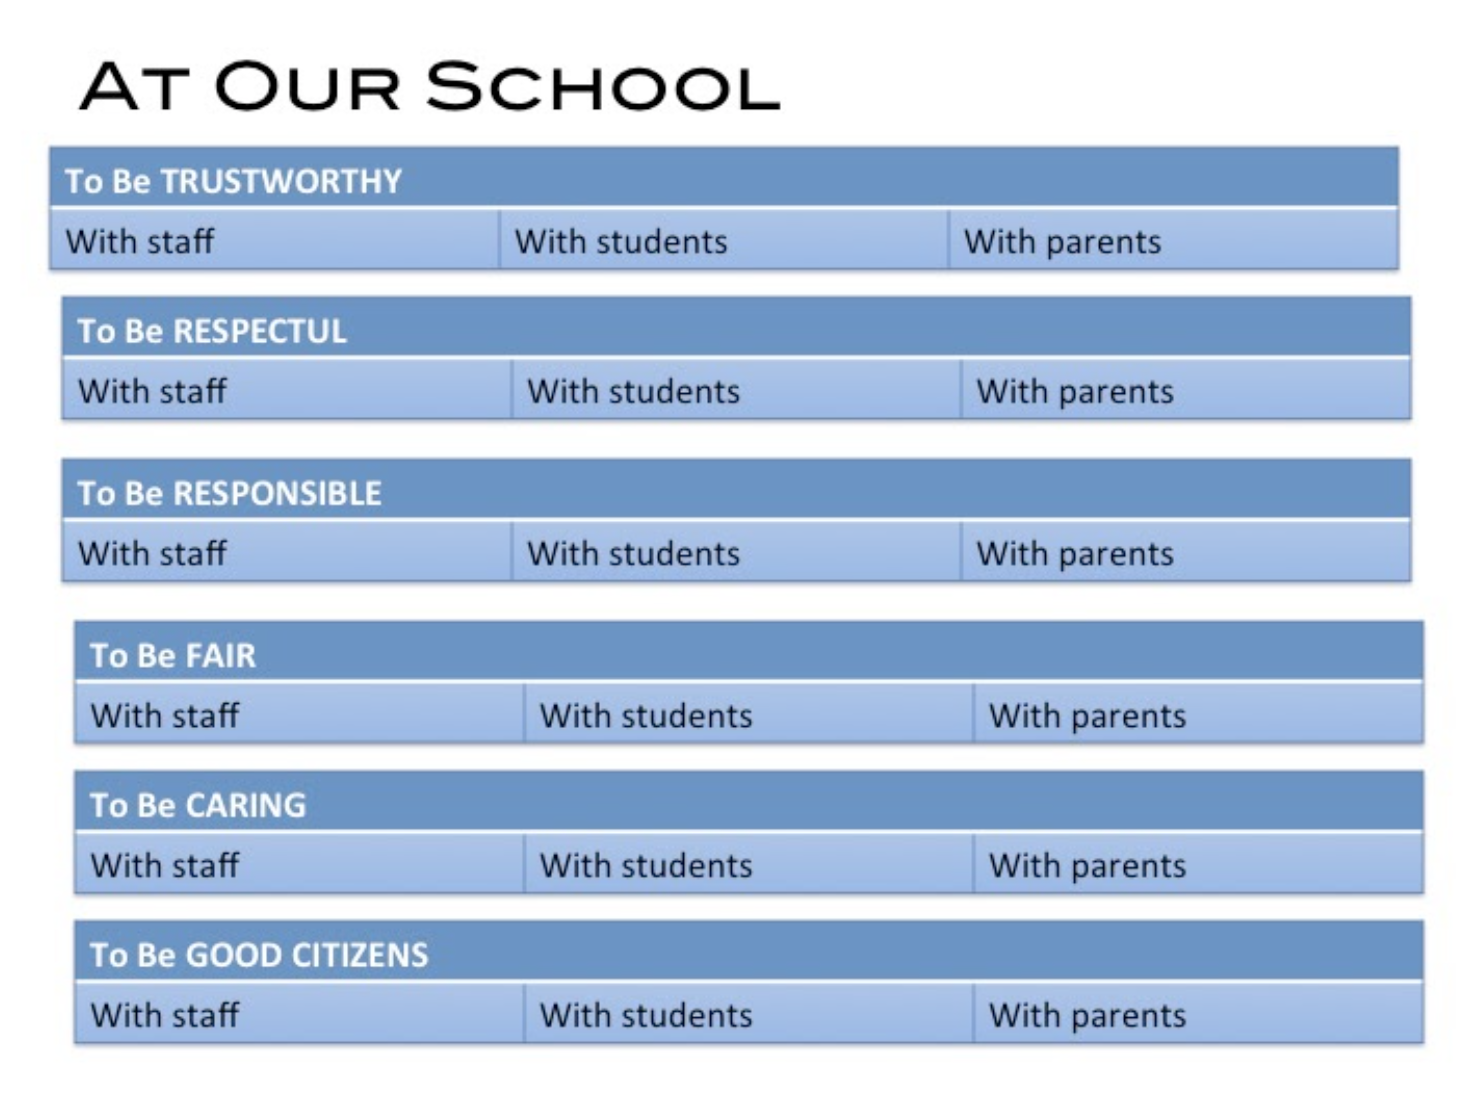 A School's Desired Actions